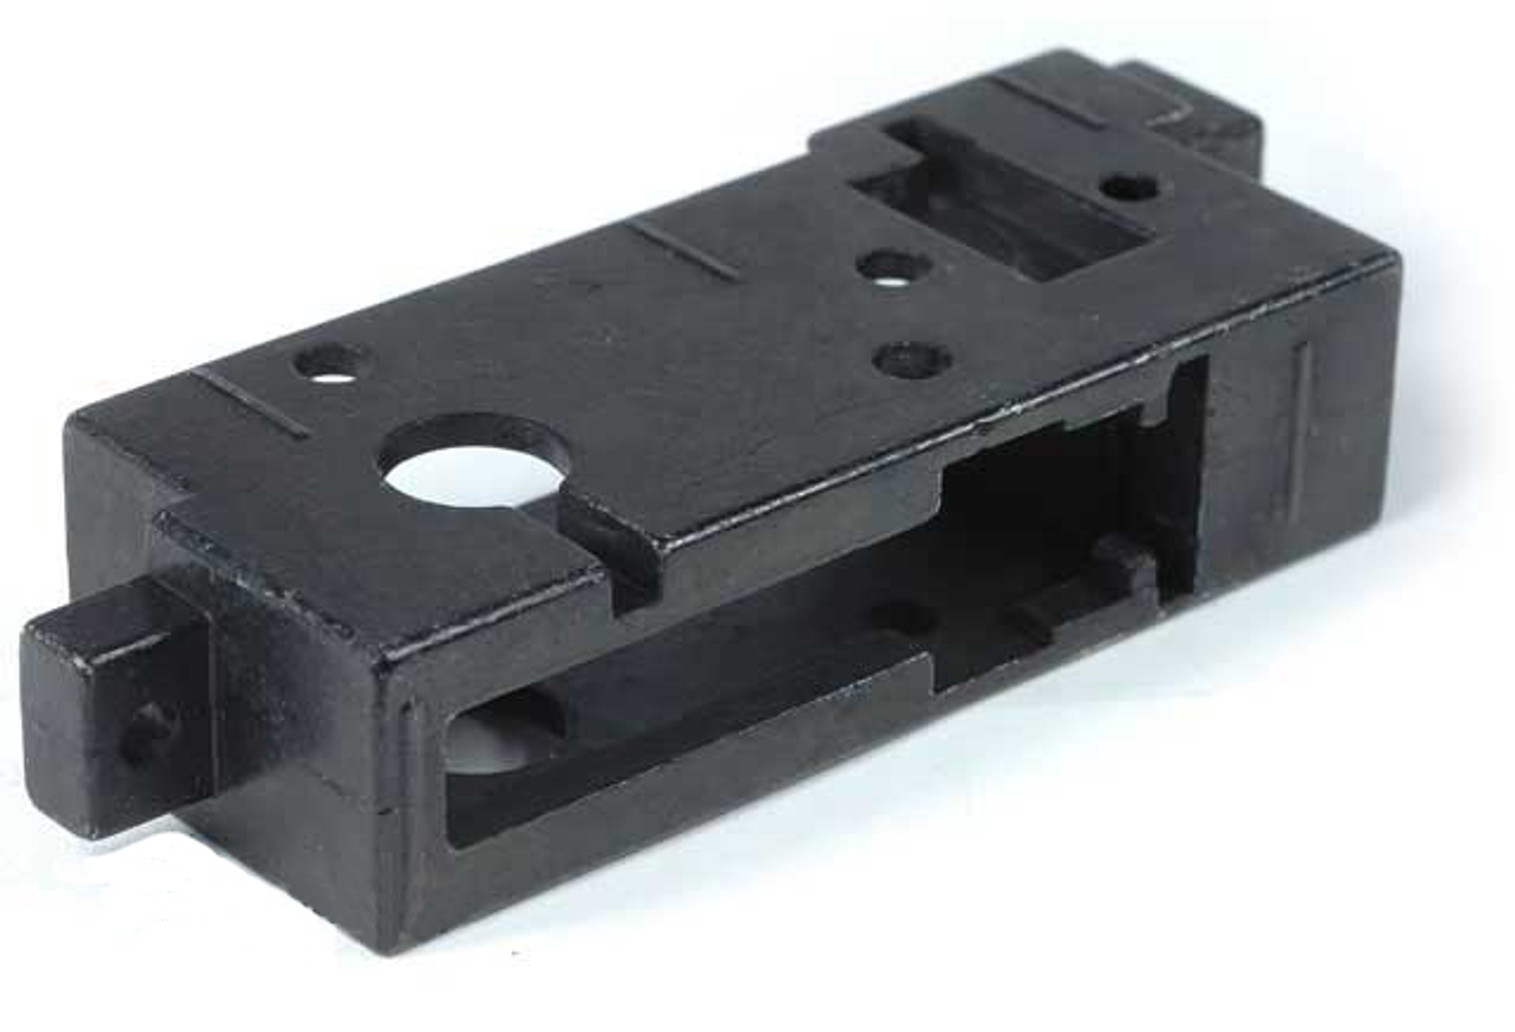 Replacement M4/M16 Trigger Assembly Housing for WE AWSS Airsoft Gas Blowback Rifle